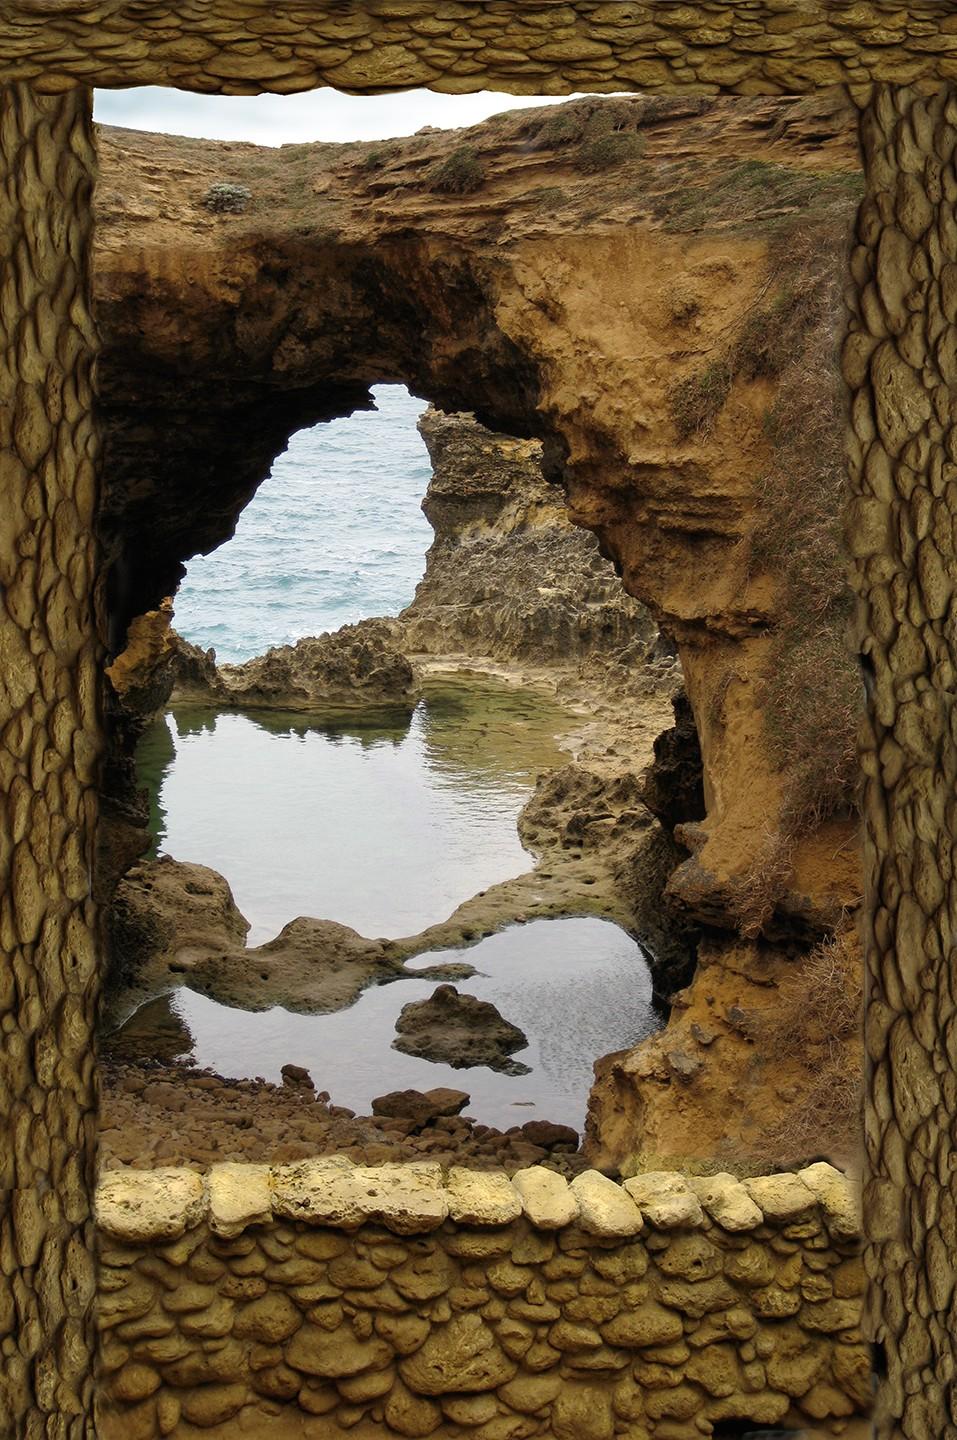 Robin Botie of Ithaca, New York, photoshops grottos along The Great Ocean Road in Australia on her grief journey to bury her daughte's ashes.